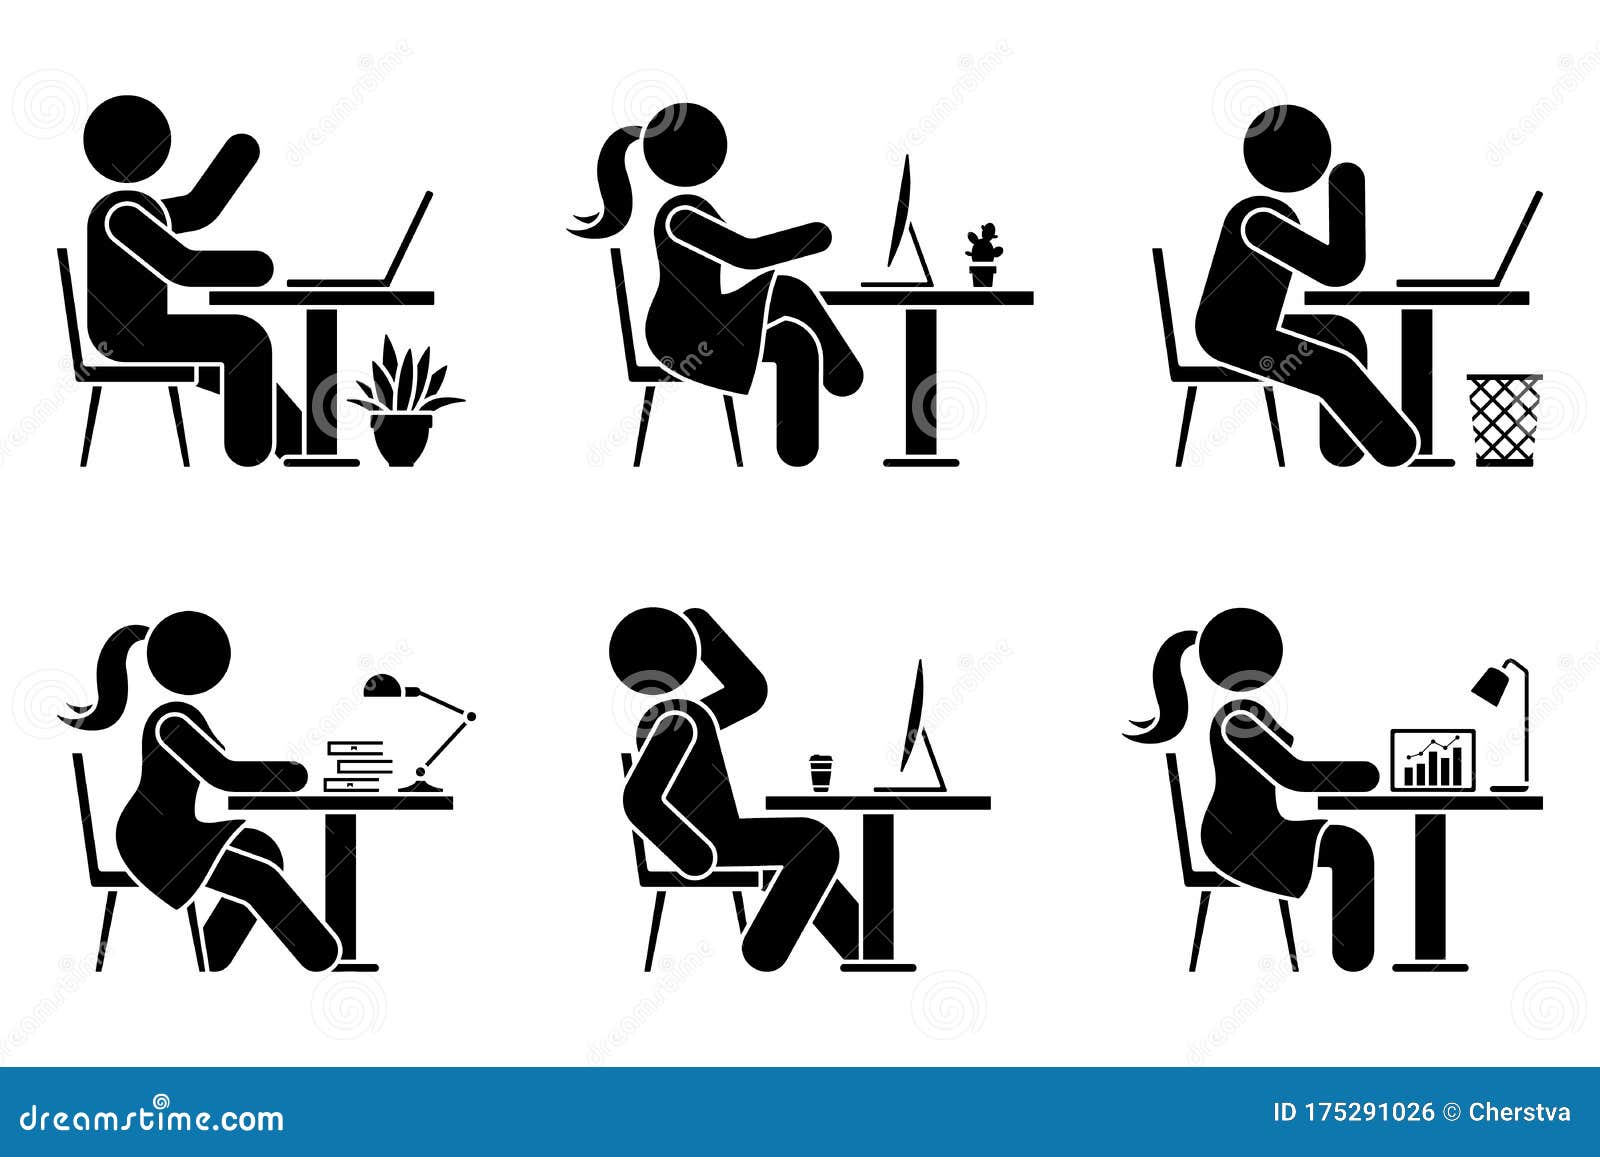 sitting at desk office stick figure business man and woman side view poses pictogram silhouette  icon work set